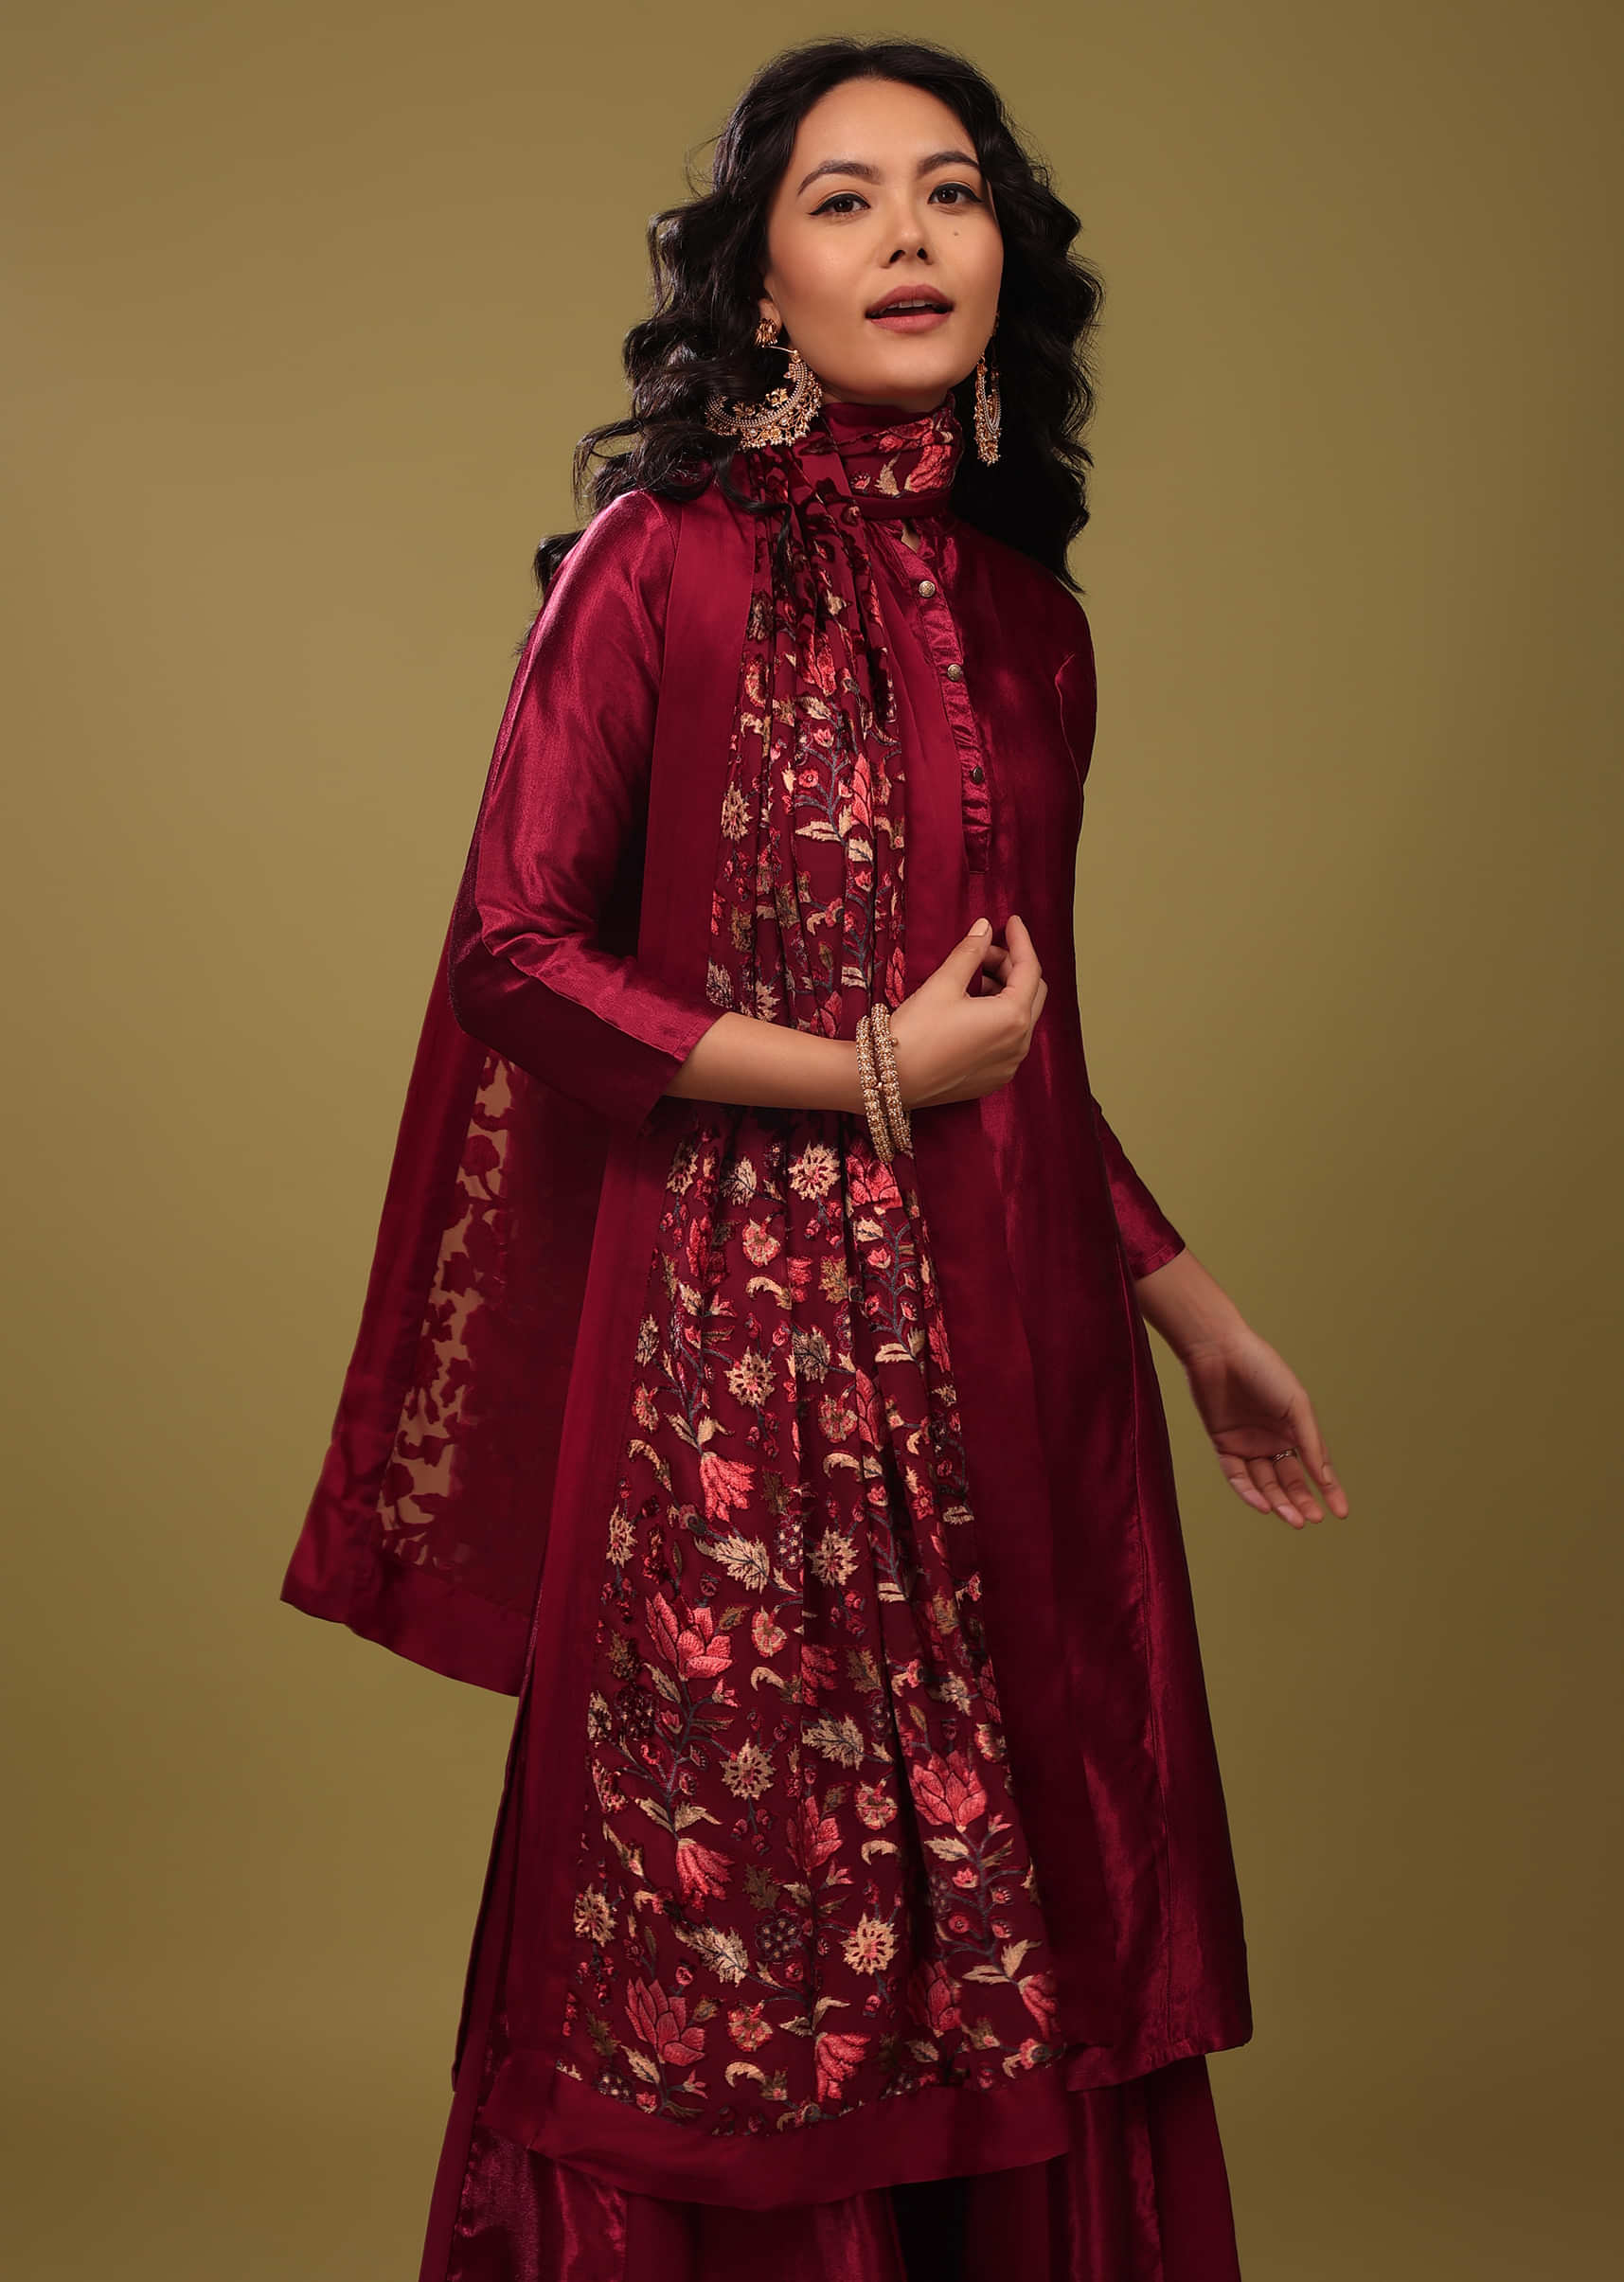 Scarlet Red Palazzo Suit In Gajji Silk With A Beautiful Velvet Floral Embroidered Dupatta